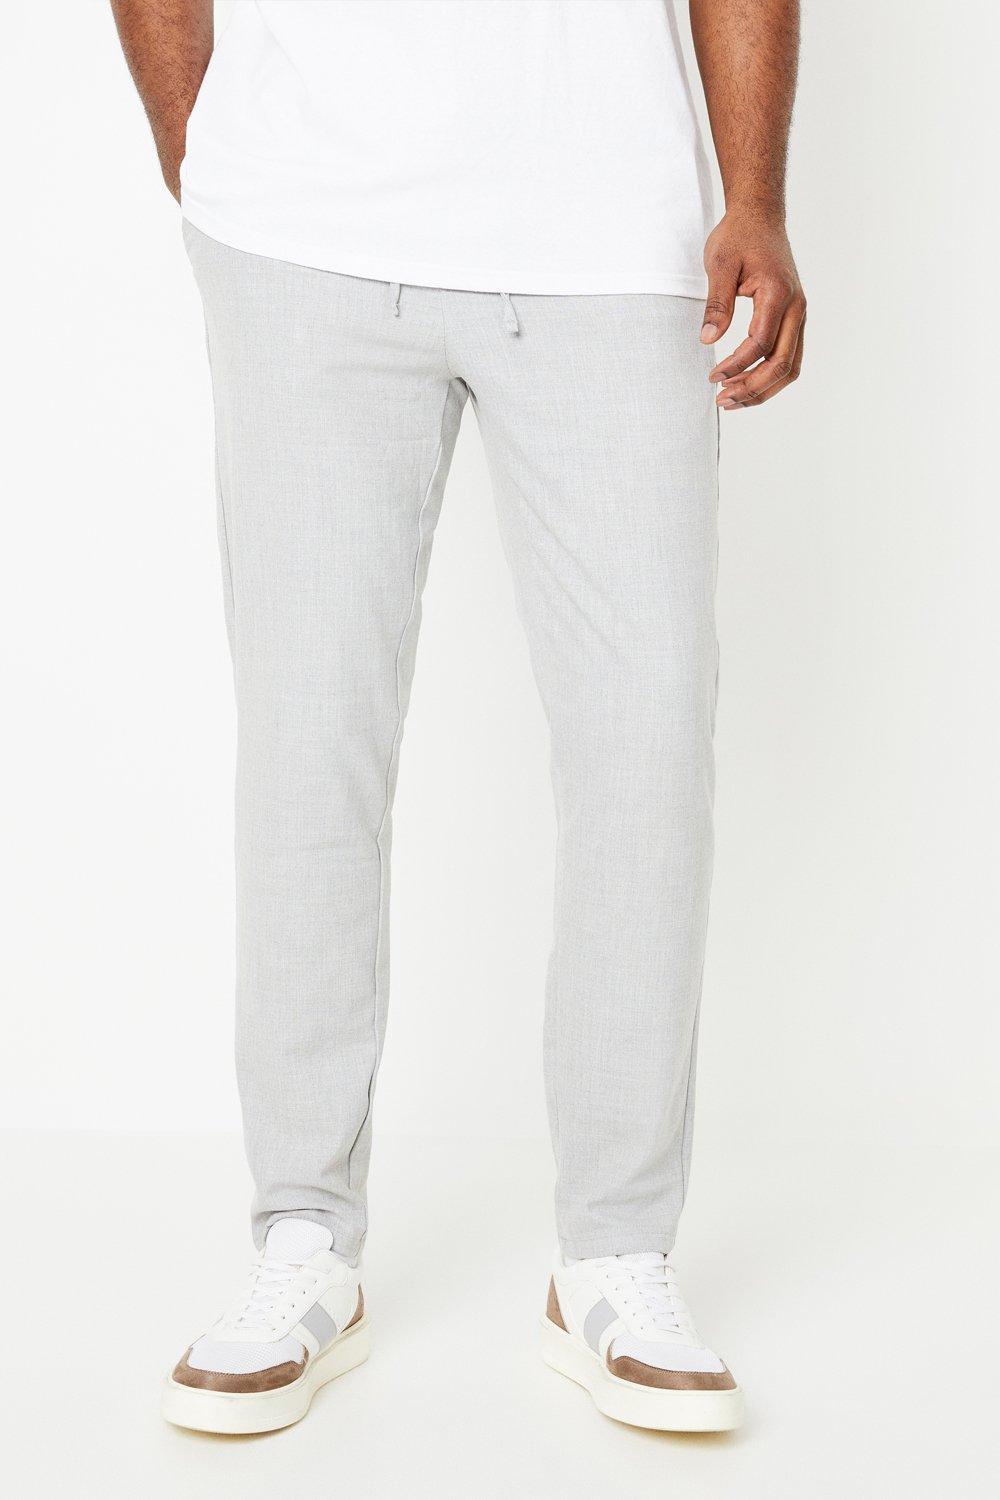 Mens Slim Fit Tapered Trouser from Burton